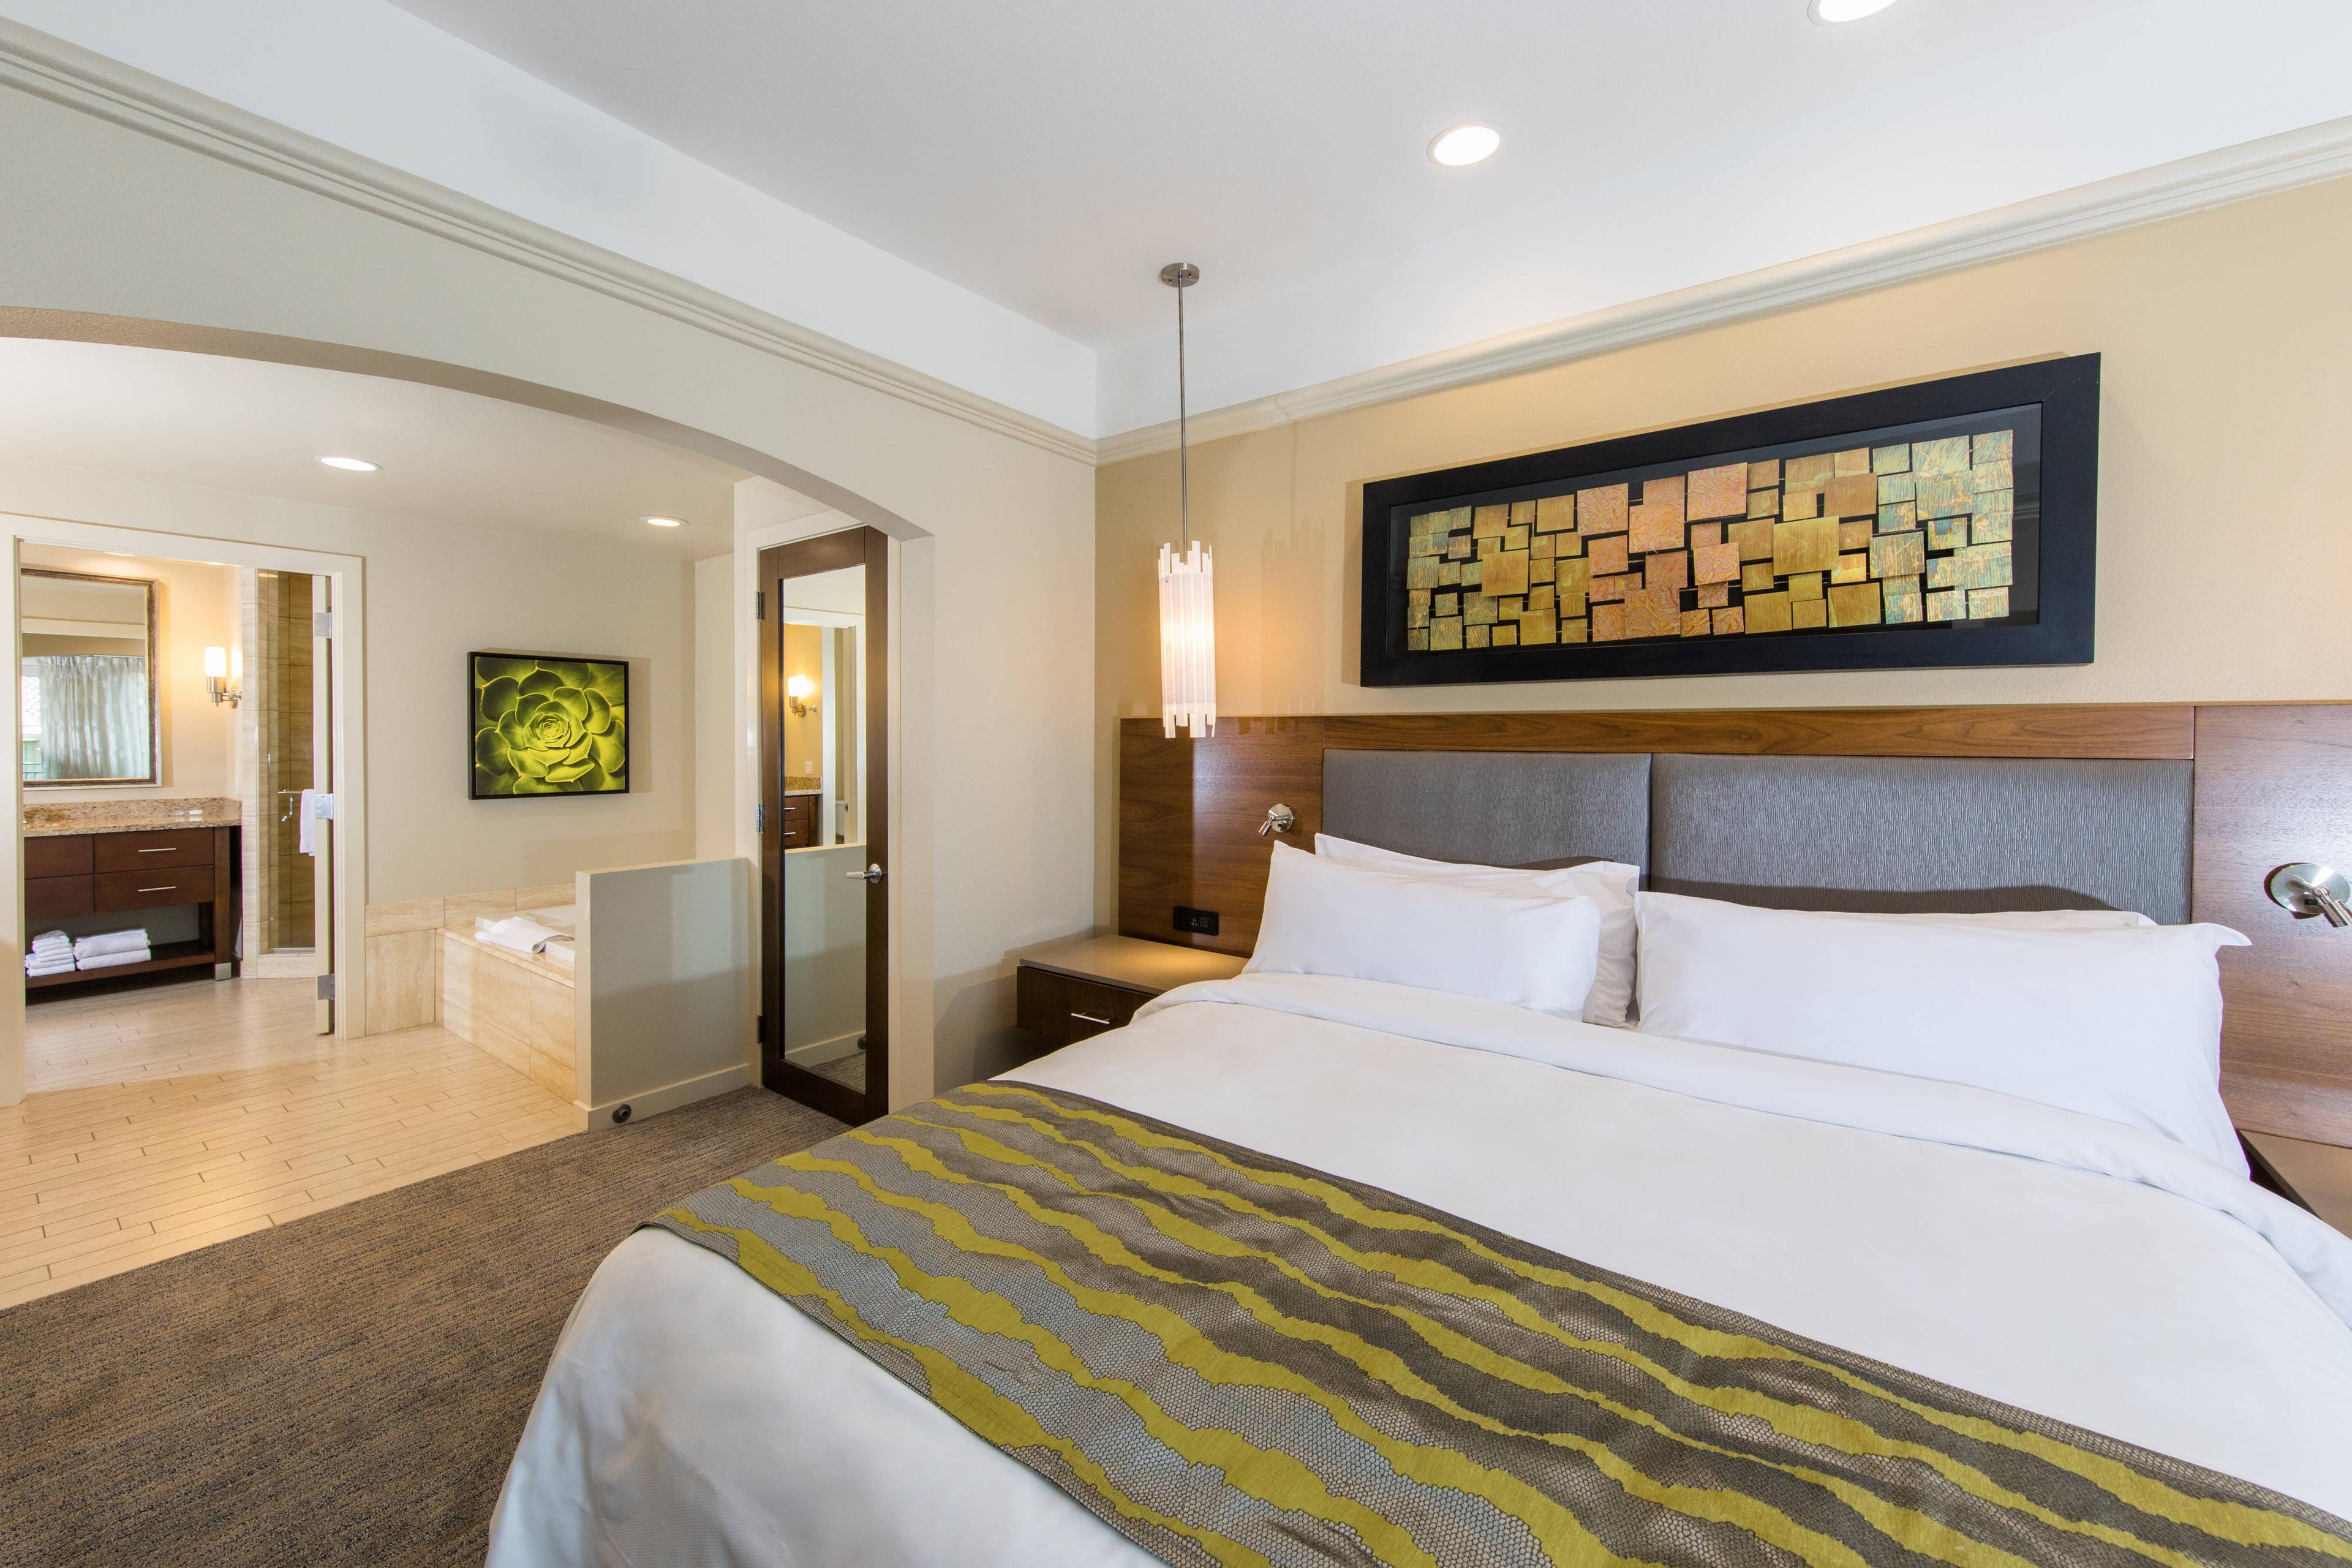 After a busy day in Palm Desert, you'll look forward to sinking in to the plush king bed in your master suite. The bedroom opens to a large bathroom with an oversized soaking tub.